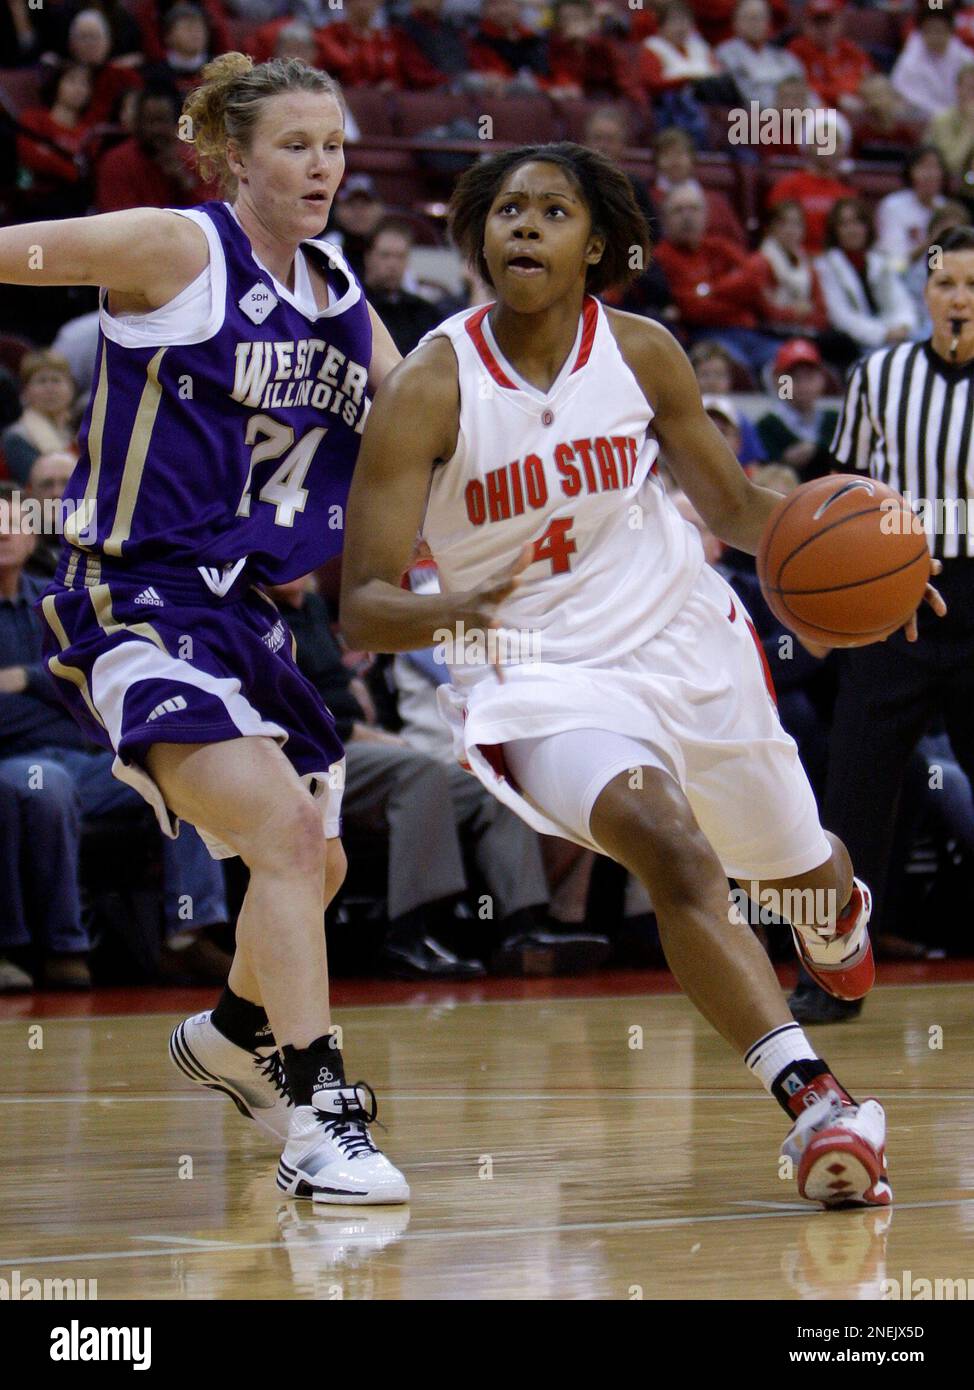 Ohio State's Tayler Hill, right, drives to the basket against Western ...